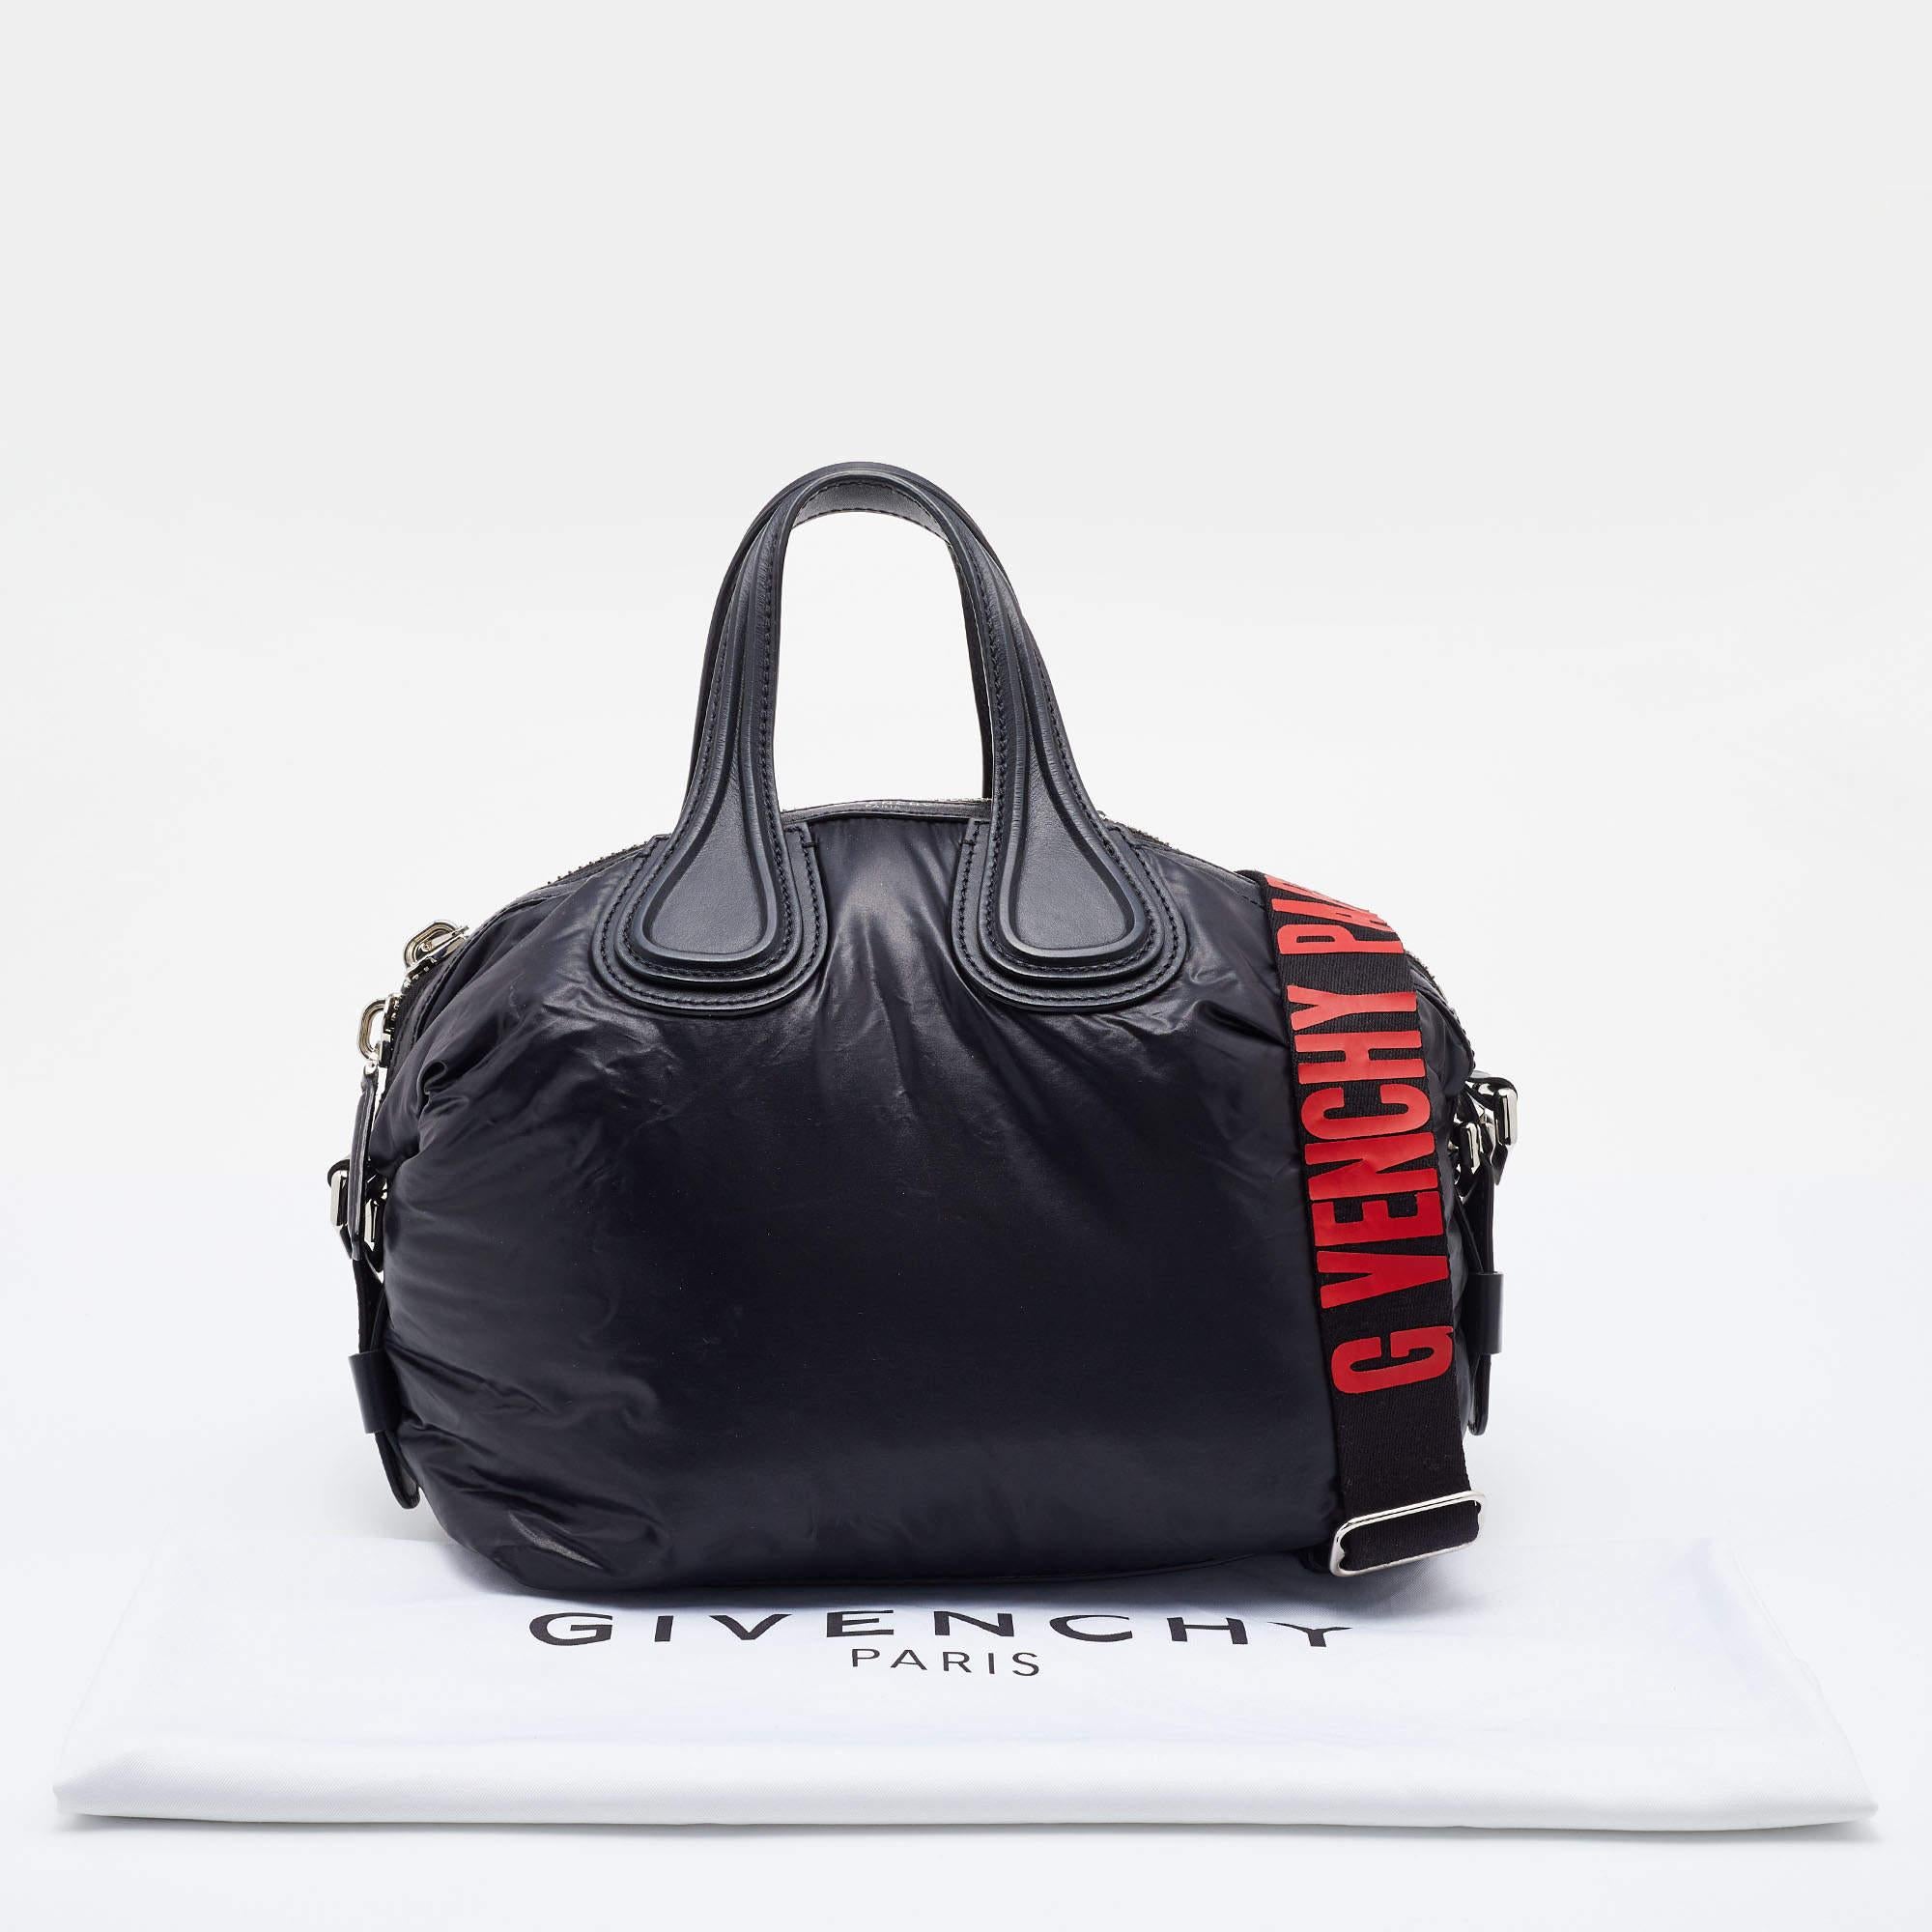 Givenchy Black Satin and Leather Small Nightingale Bag 6